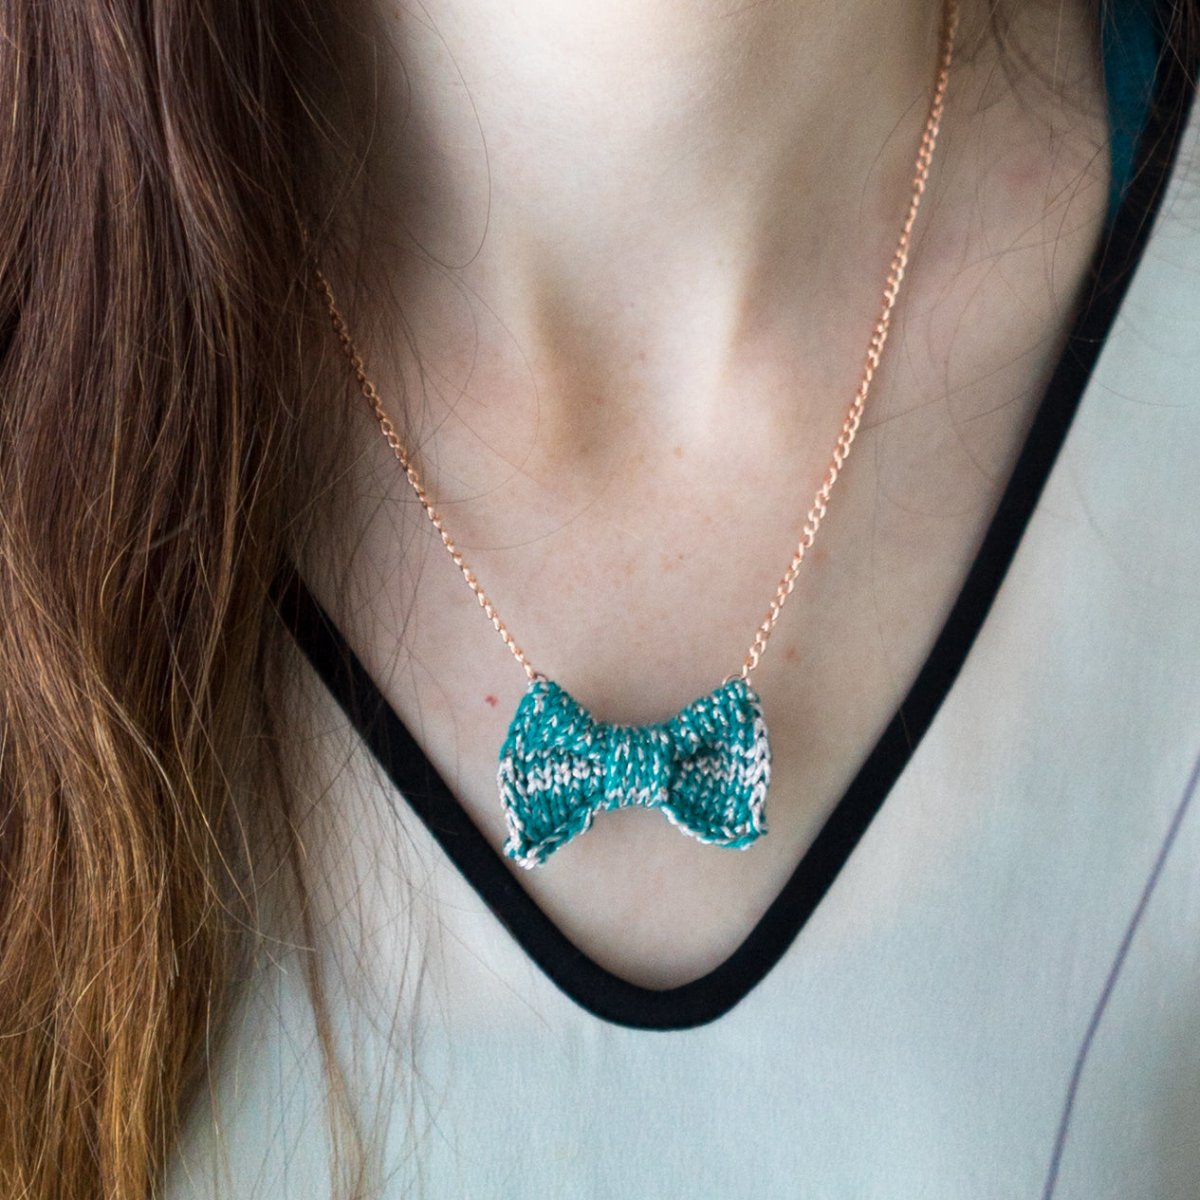 Sparkly Green + Pale Gold Mini Bow Tie Necklace - Wool & Water